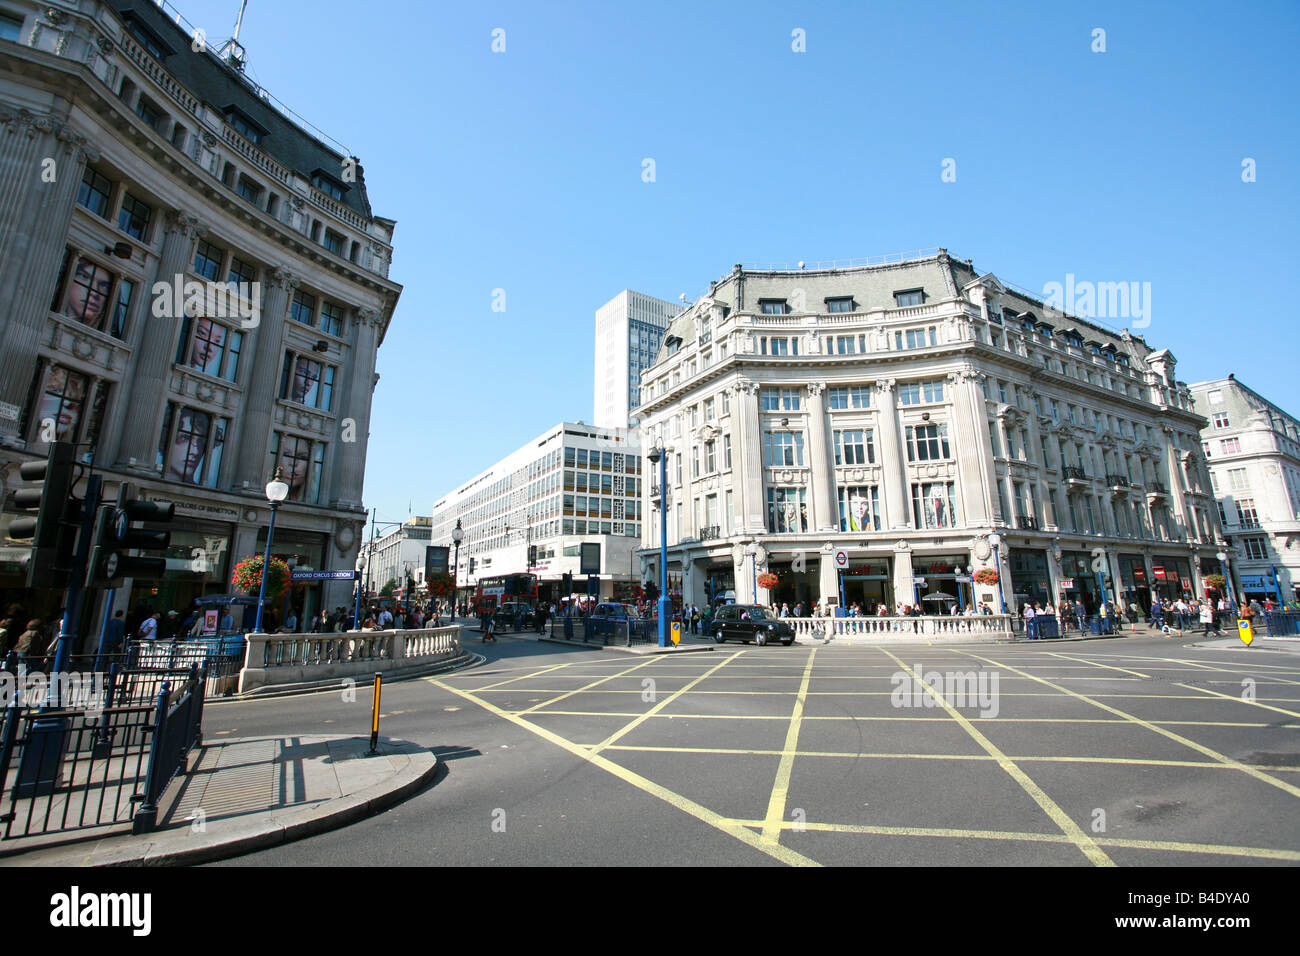 Tourists shopping in Oxford Circus where Oxford Street and Regent Street cross, major London retail shopping area district UK Stock Photo